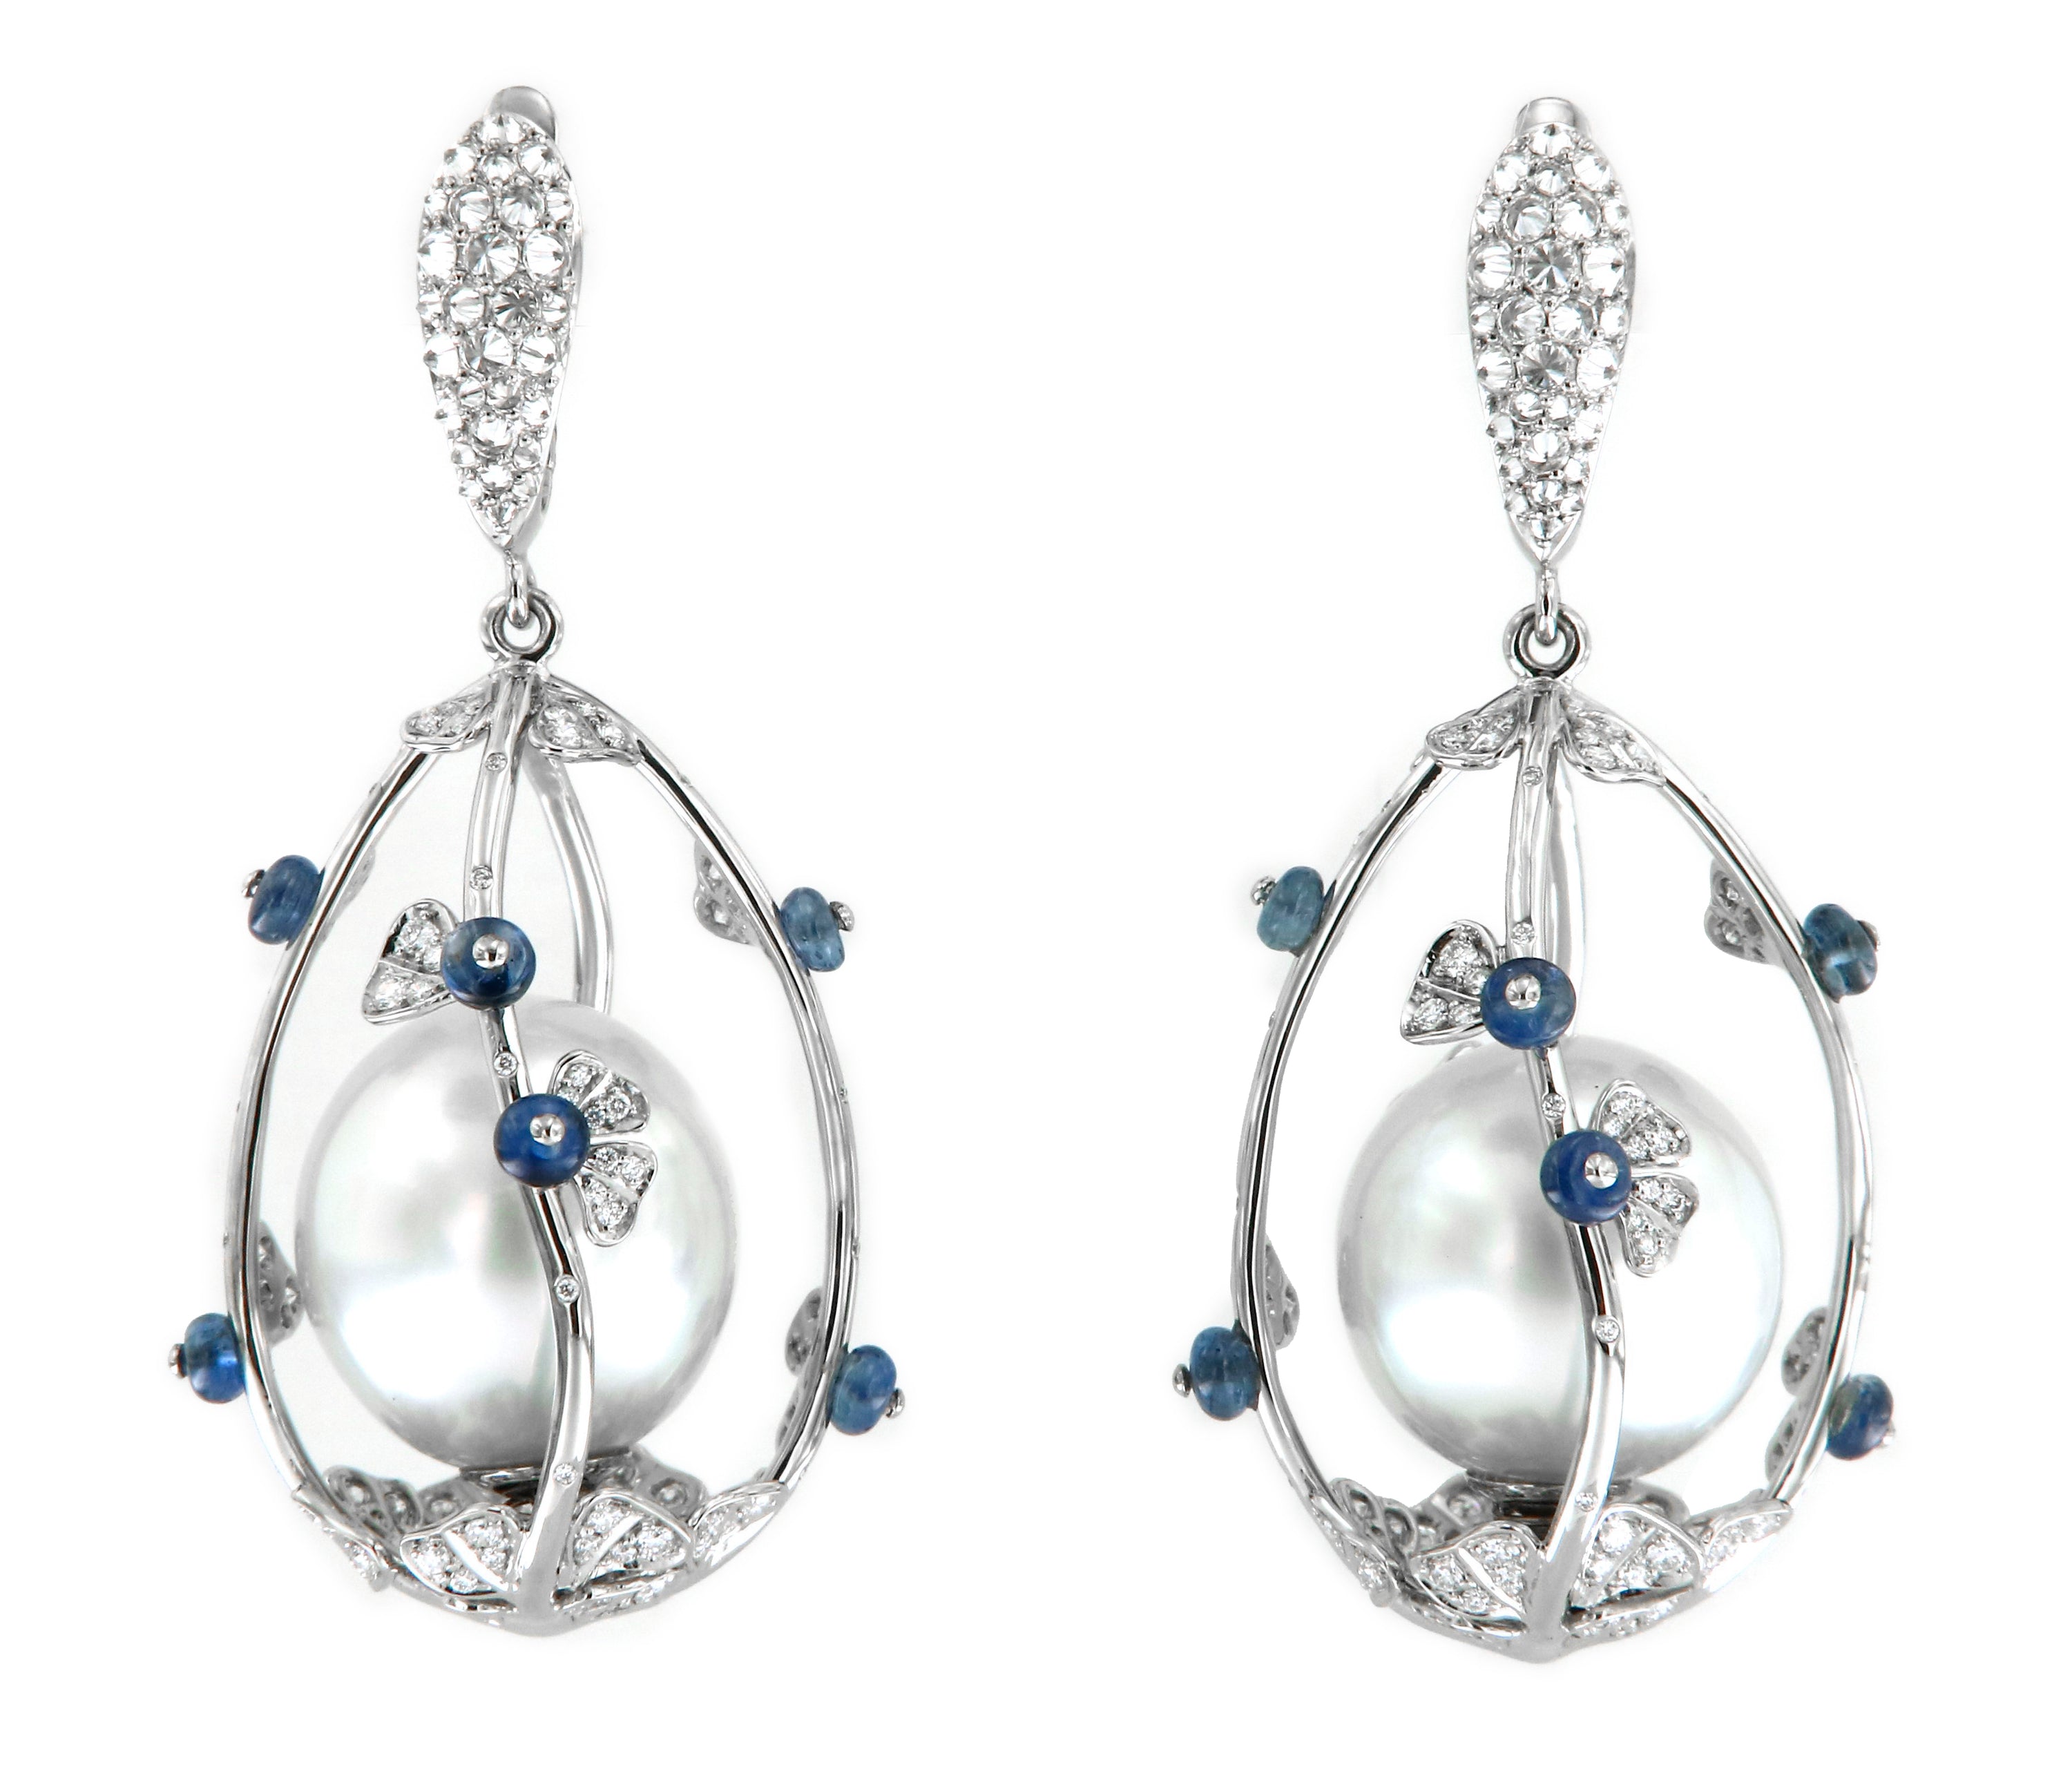 Earrings "Pearlcage" Platinum with Southseapearls, White Diamonds and Blue Sapphires